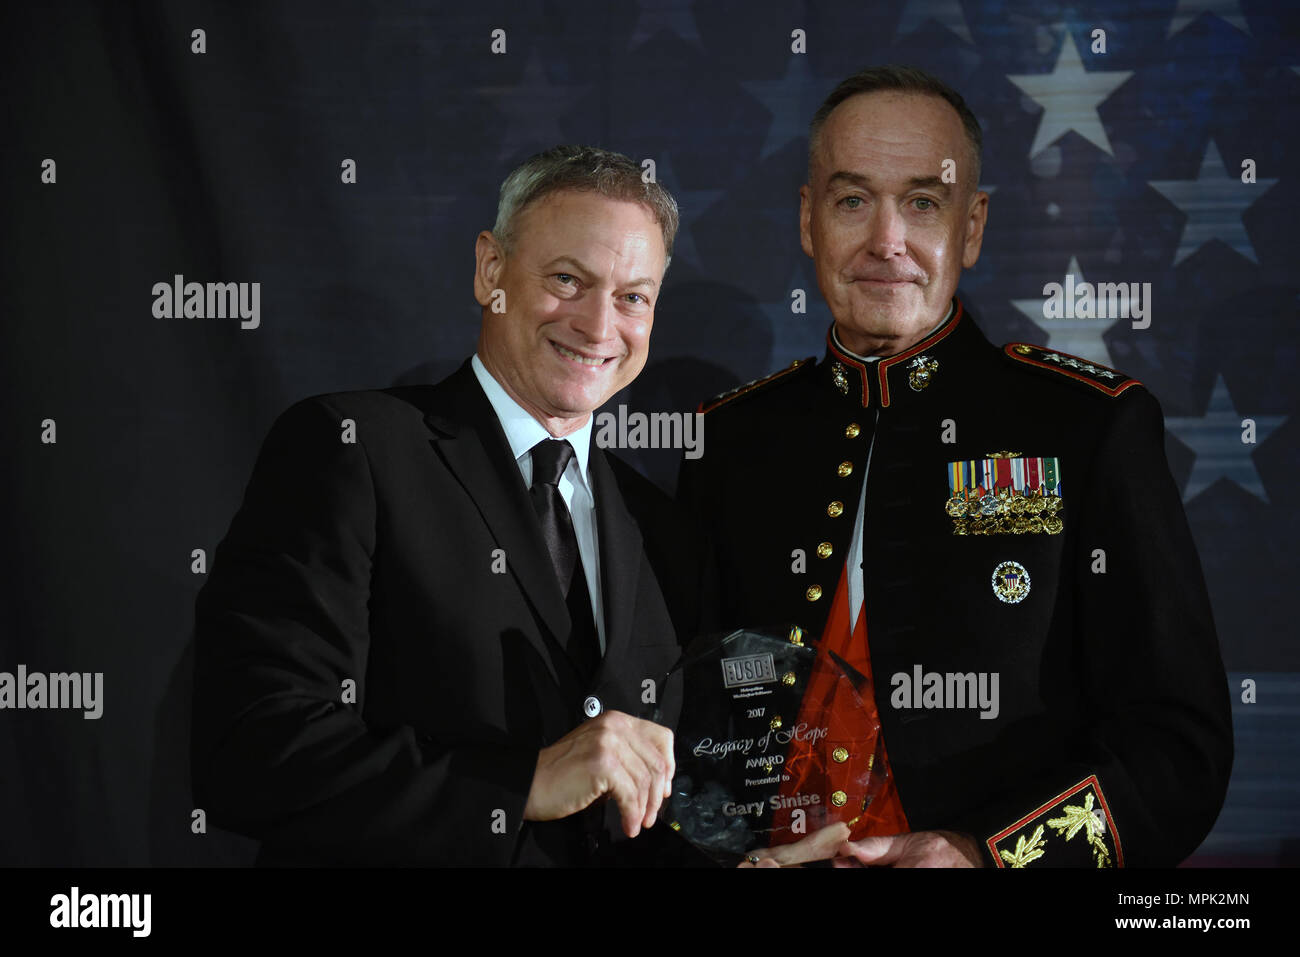 Marine Gen. Joseph Dunford, right, chairman of the Joint Chiefs of Staff, presents Gary Sinise, actor and humanitarian, the Legacy of Hope Award at the USO of Metropolitan Washington-Baltimore's 35th Annual Awards Dinner, Arlington, Va., March 21, 2017. (U.S. Army National Guard photo by Sgt. 1st Class Jim Greenhill) Stock Photo